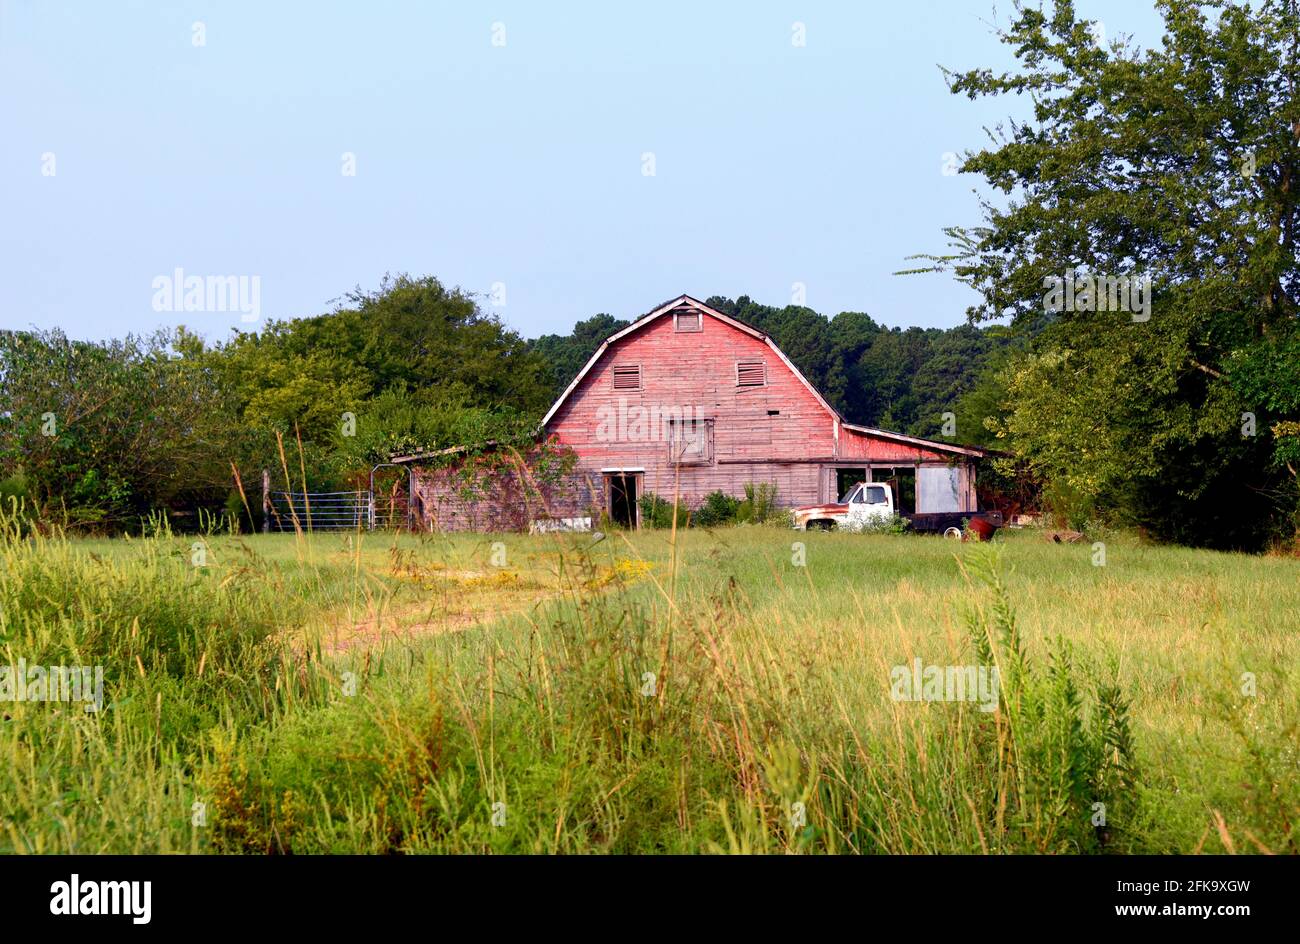 Morning greets an Arkansas farm with red, weathered, wooden barn.  Rusting truck sits besides barn.  Door is open on barn. Stock Photo